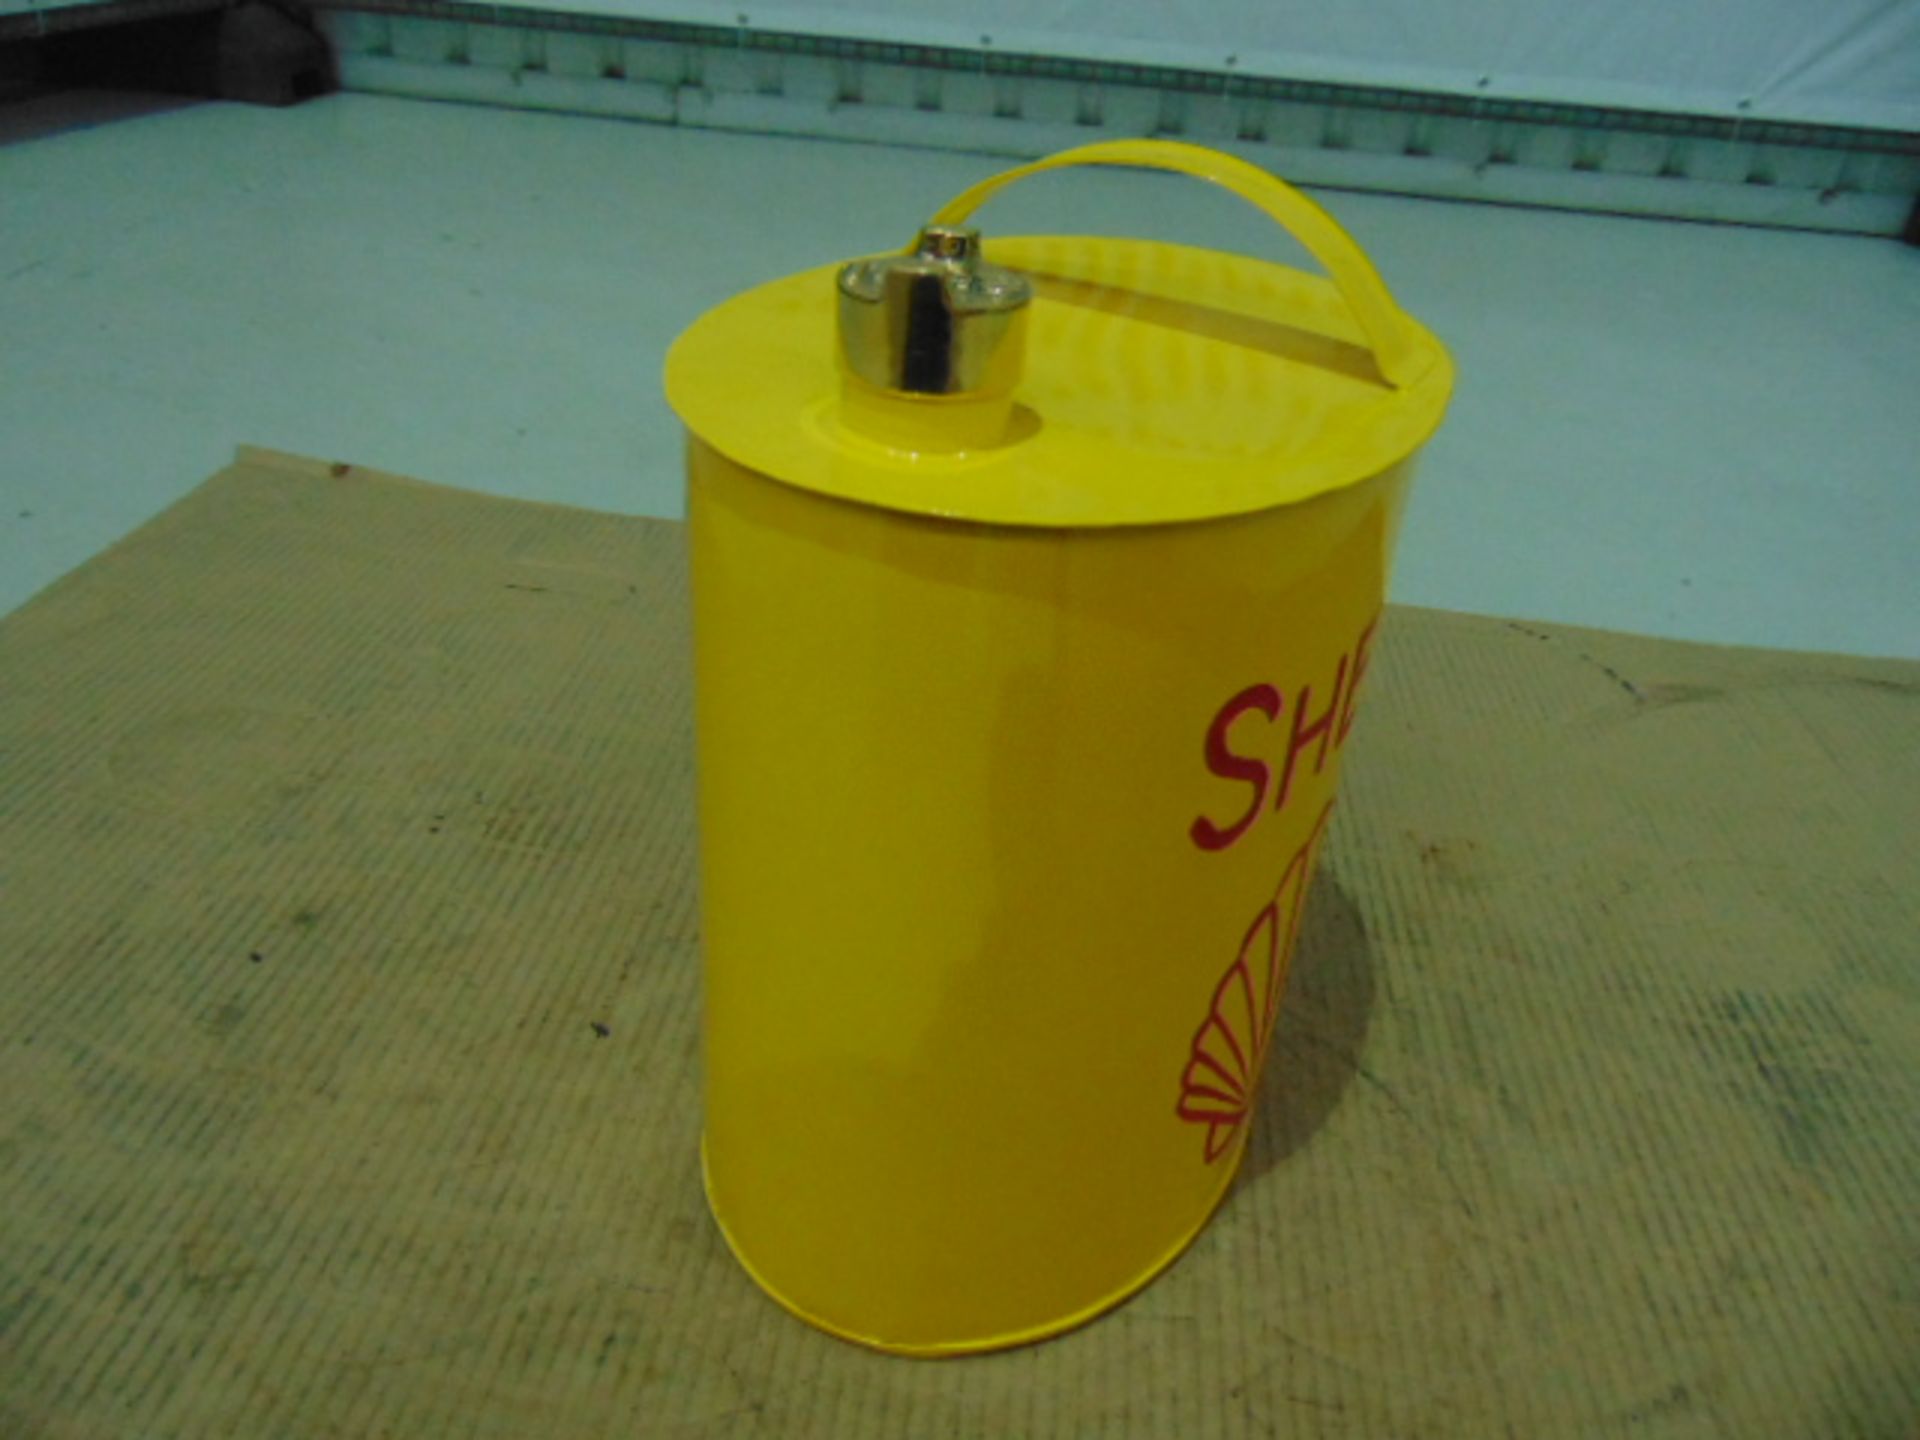 Shell Branded Oil Can - Image 2 of 6